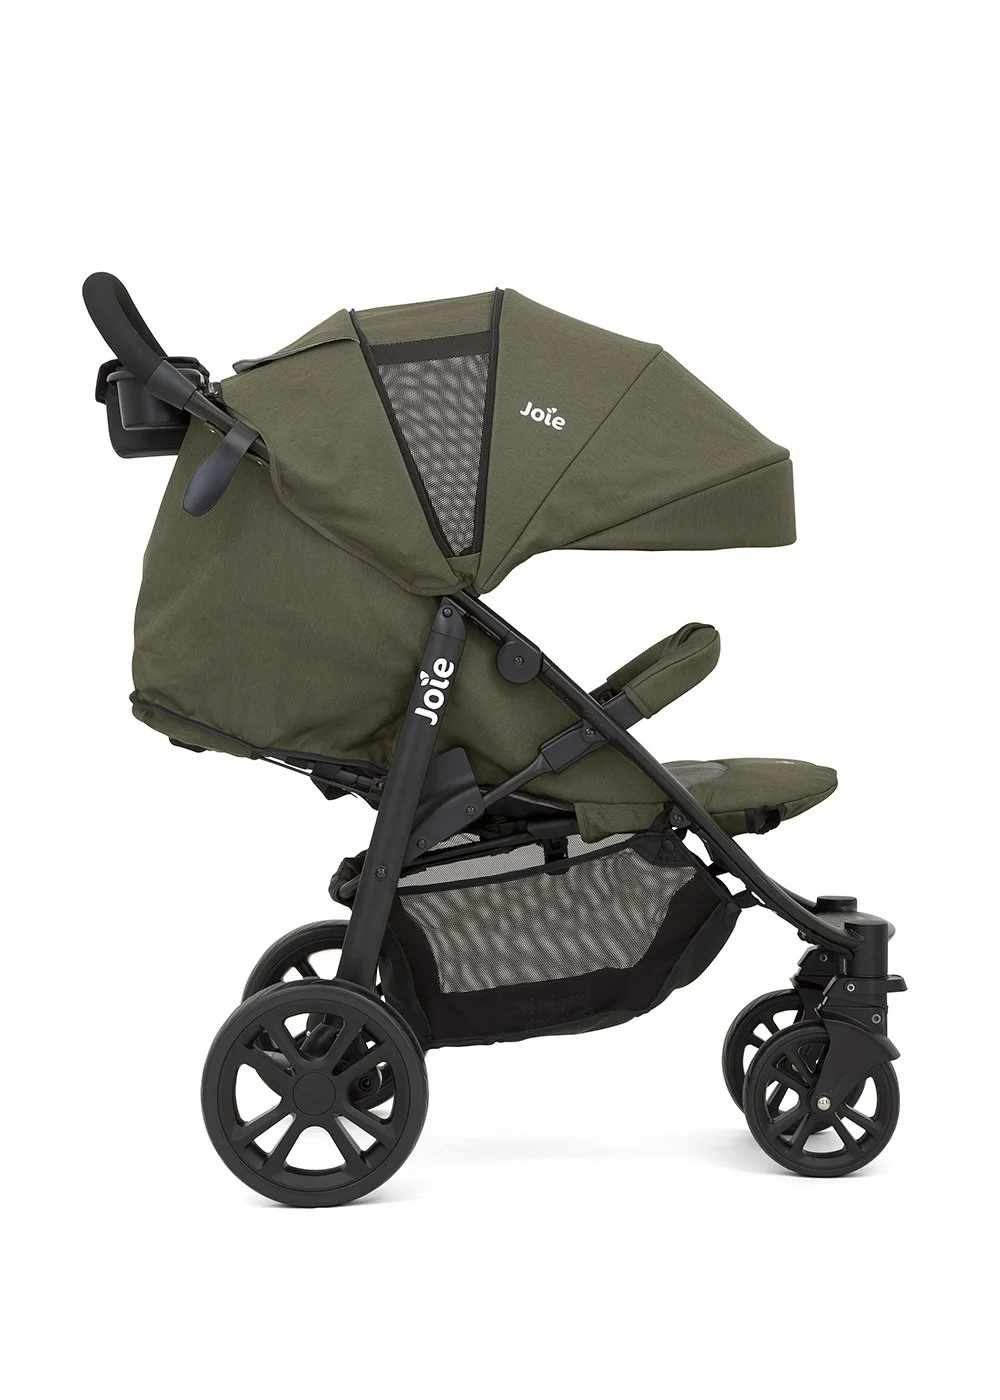 Carucior multifunctional Joie Litetrax 4 Thyme